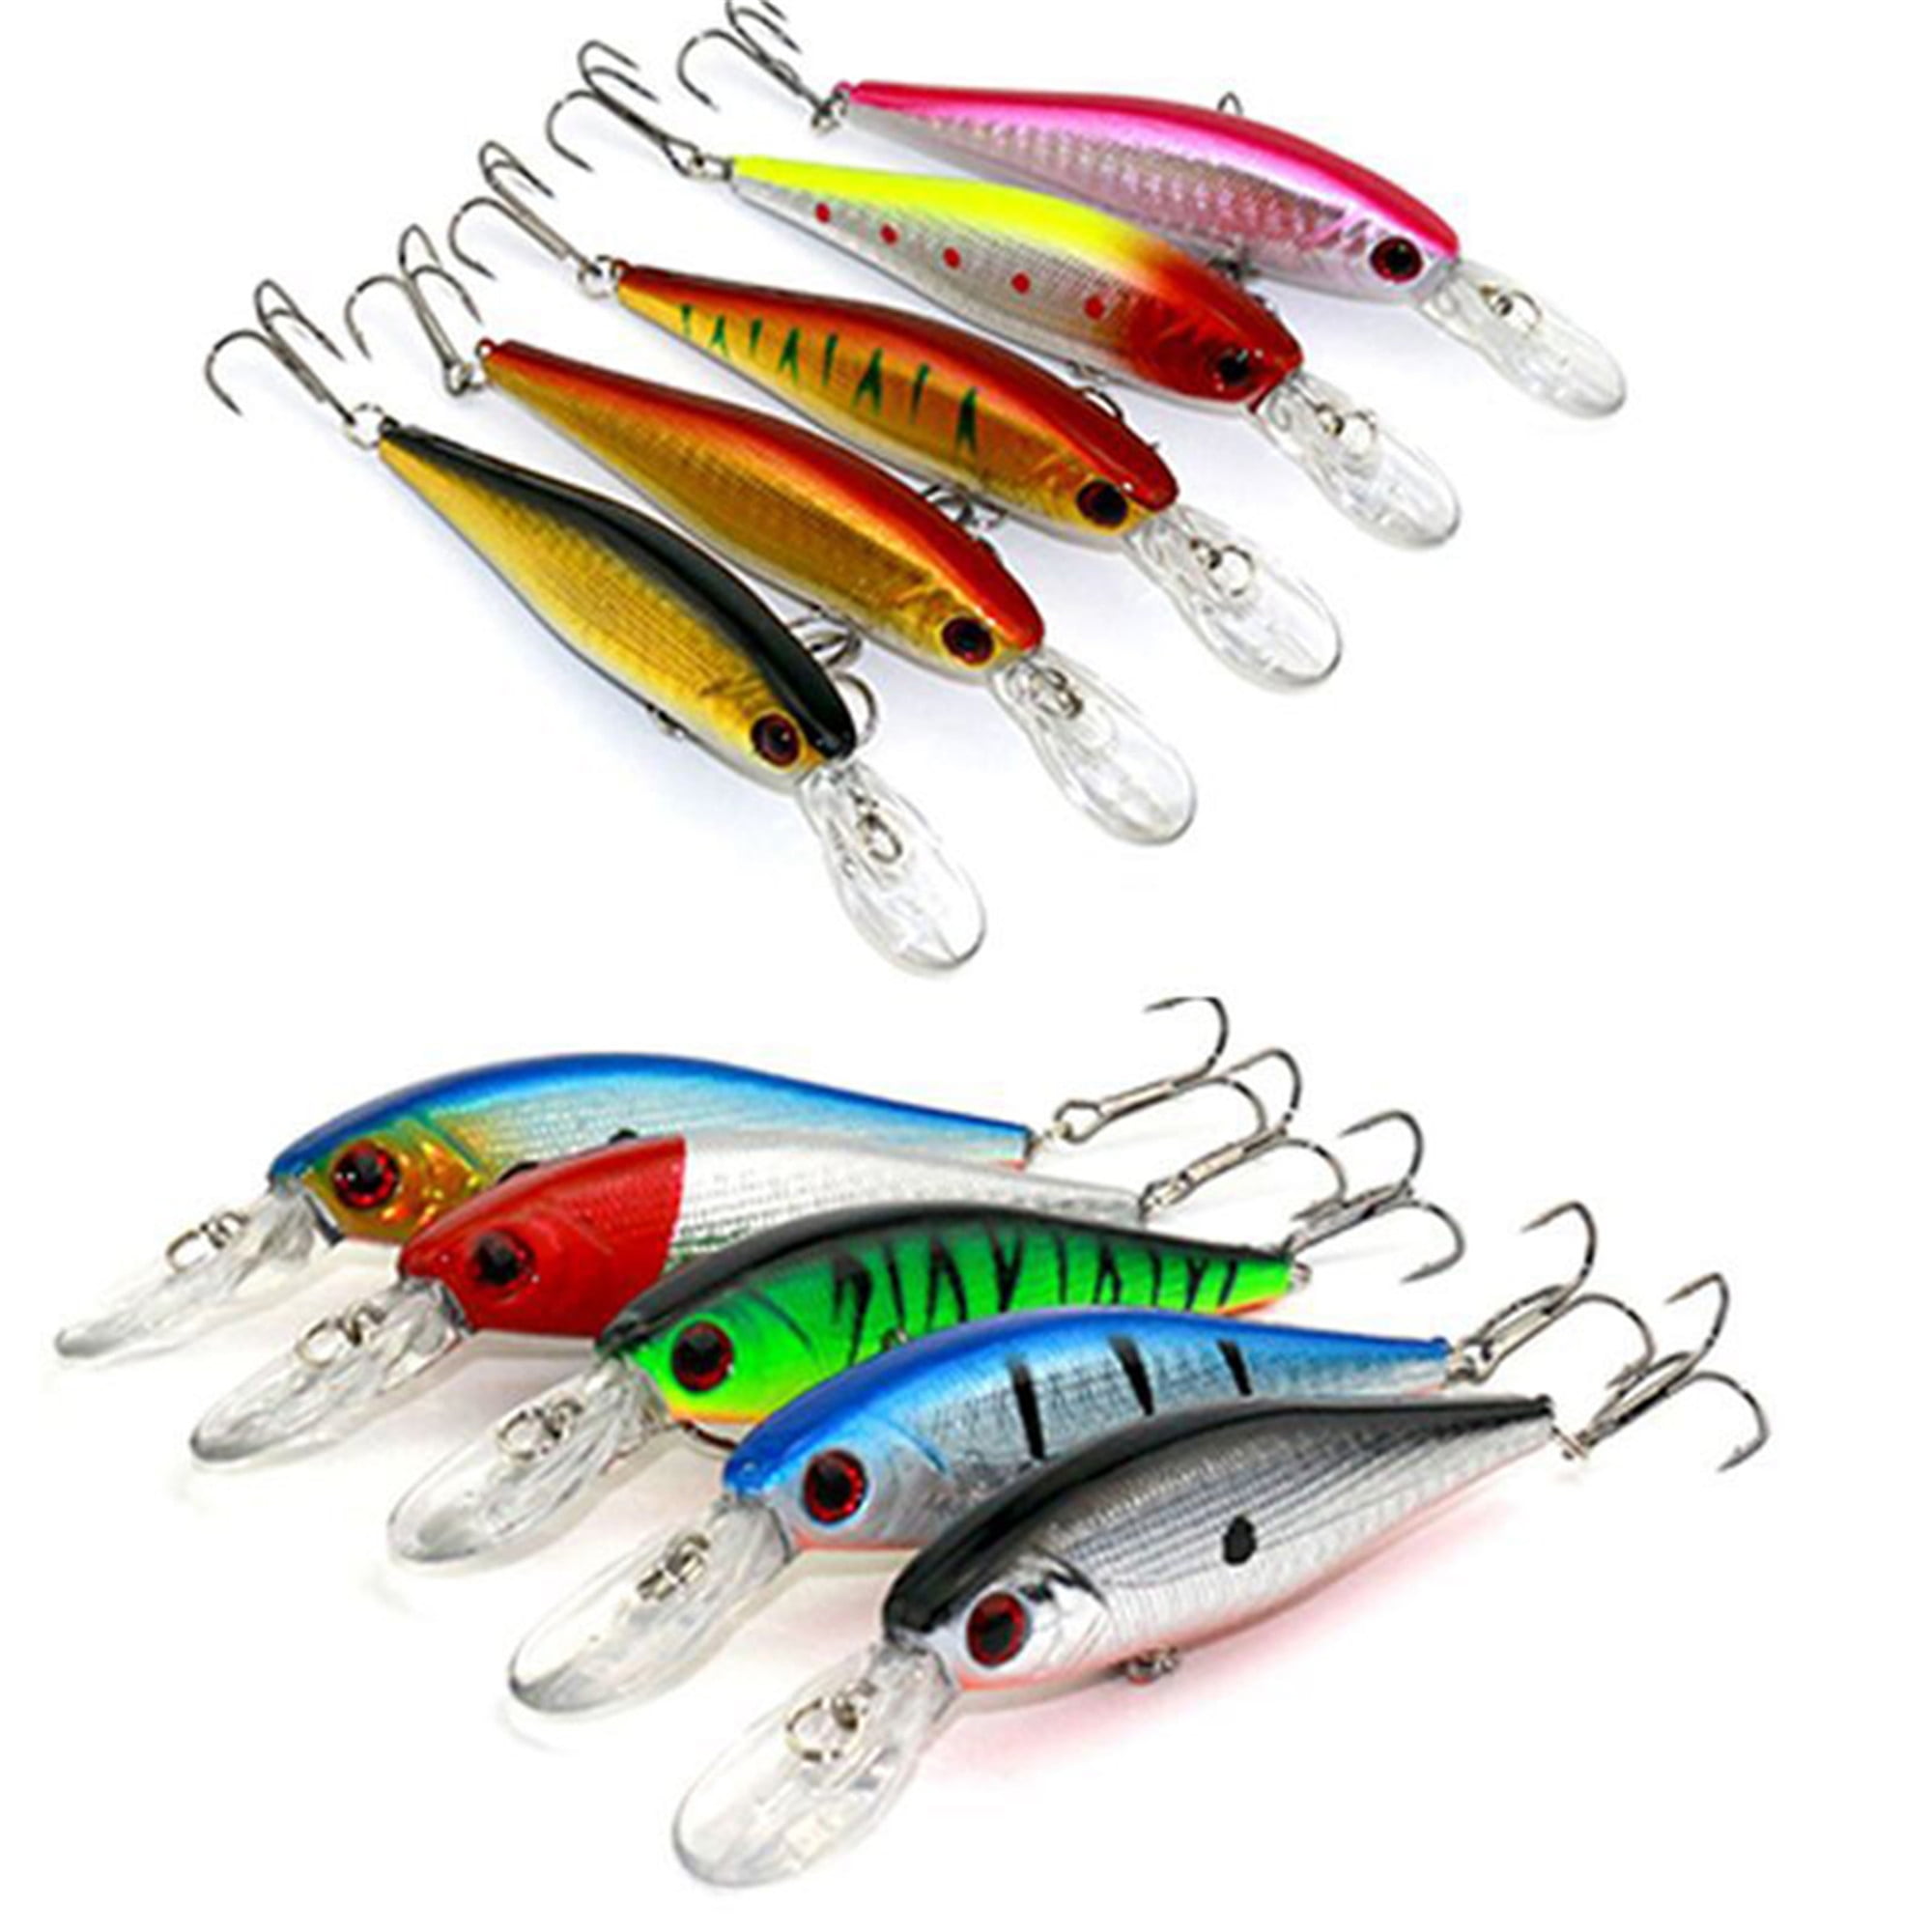 Hot Sell Hard Diver Minnow Lures Fishing Swimbait Crank Plug Bass Trout Pike T 